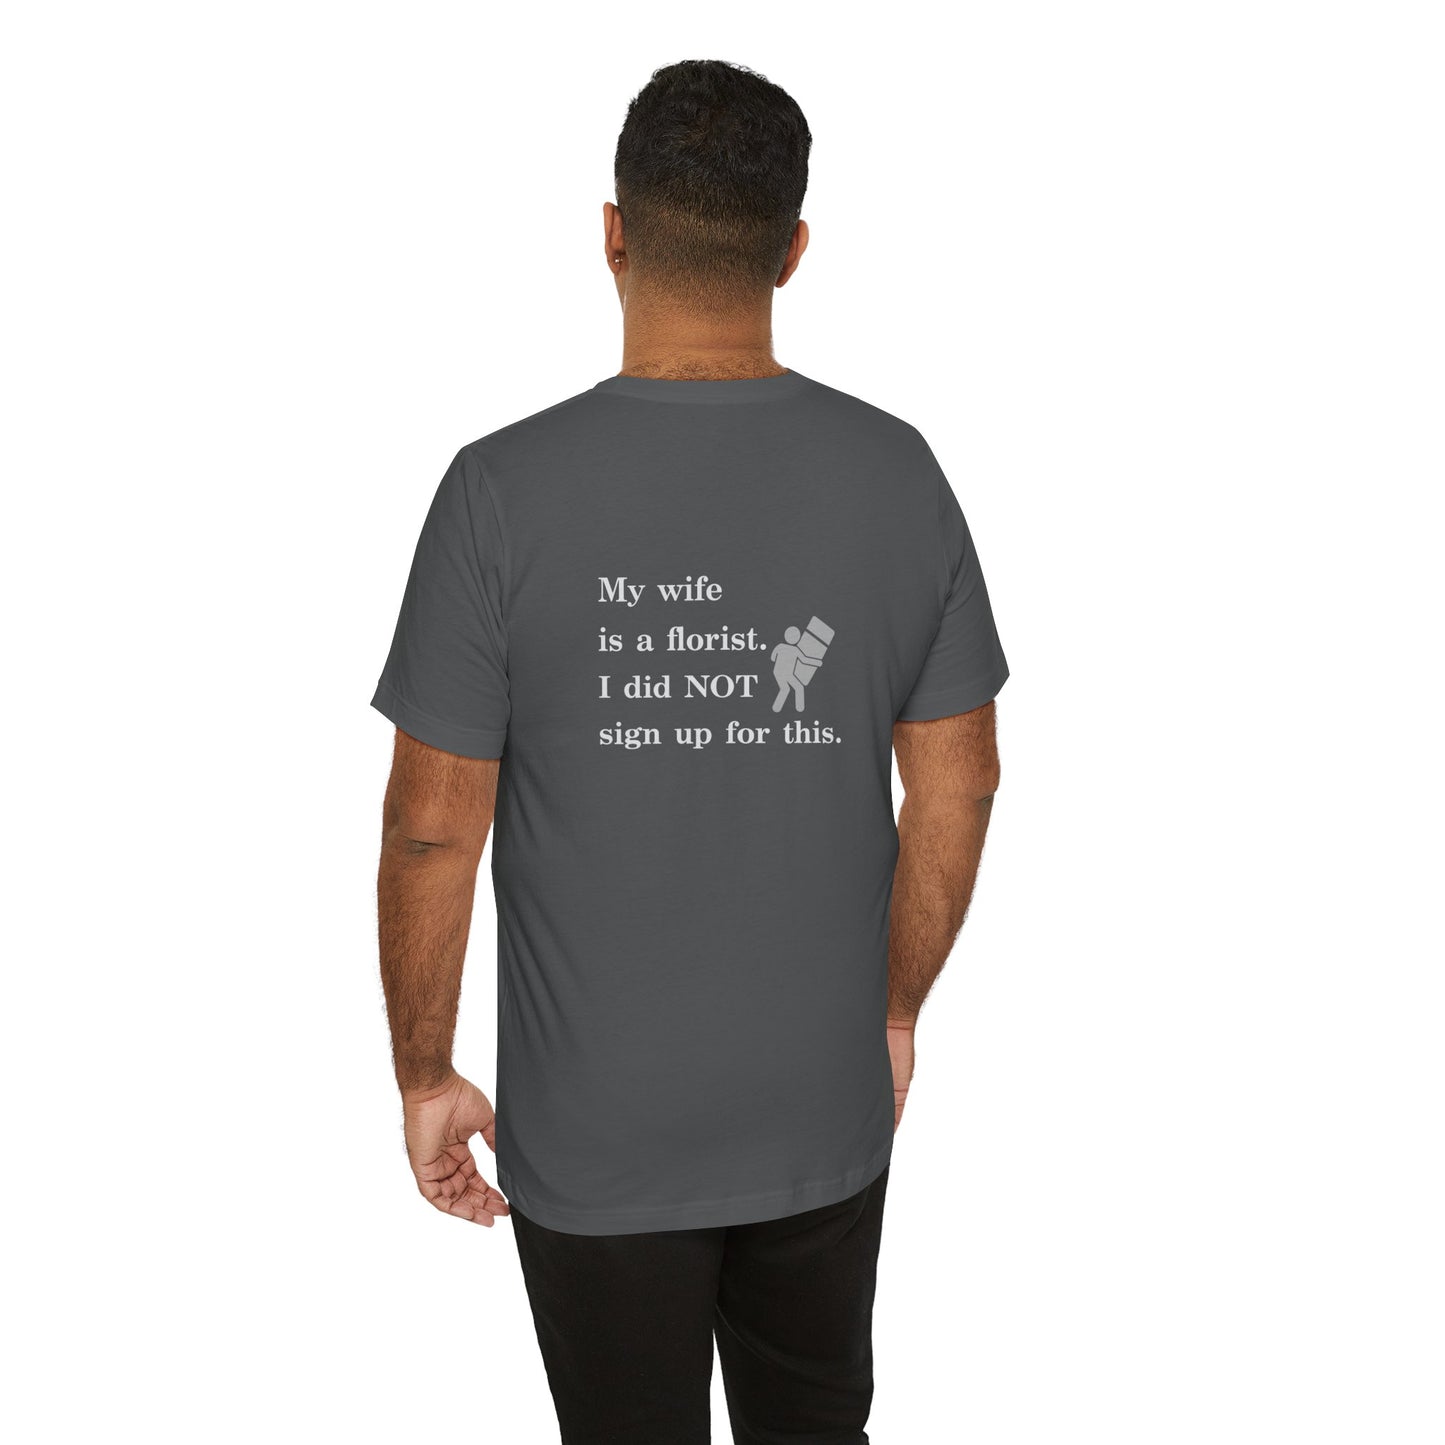 my wife is a florist, i did not sign up for this (back) graphic tee